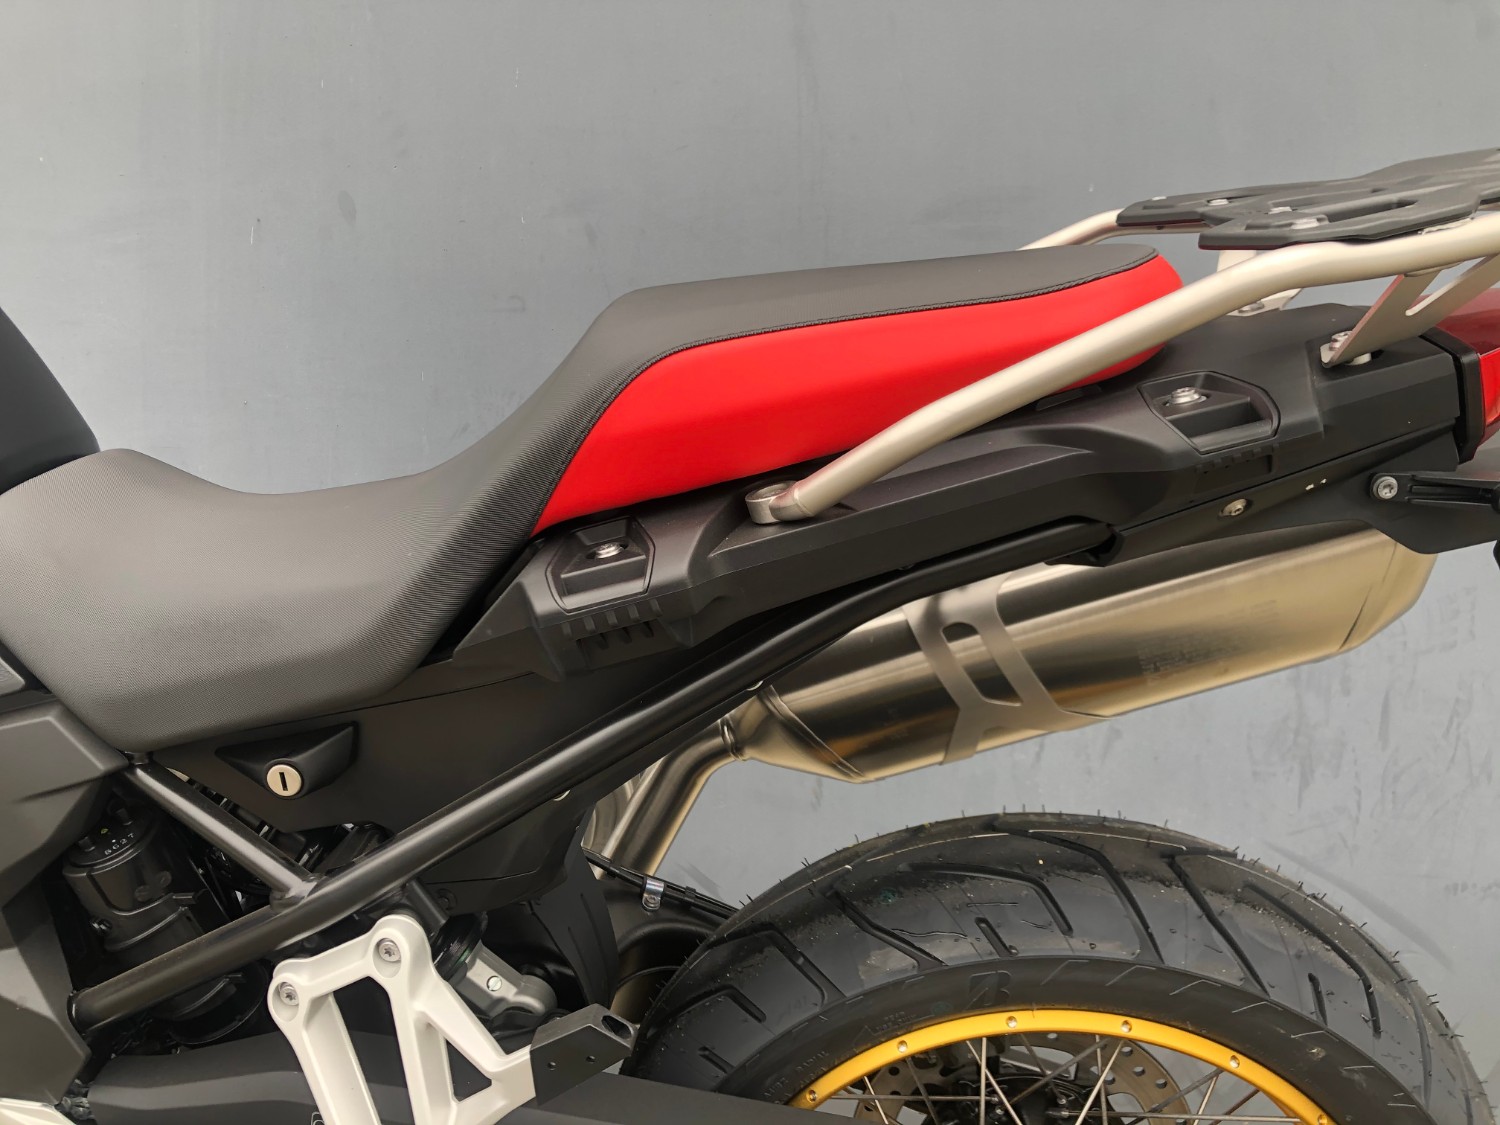 2019 BMW F850GS RallyE Low Suspension Motorcycle Image 11